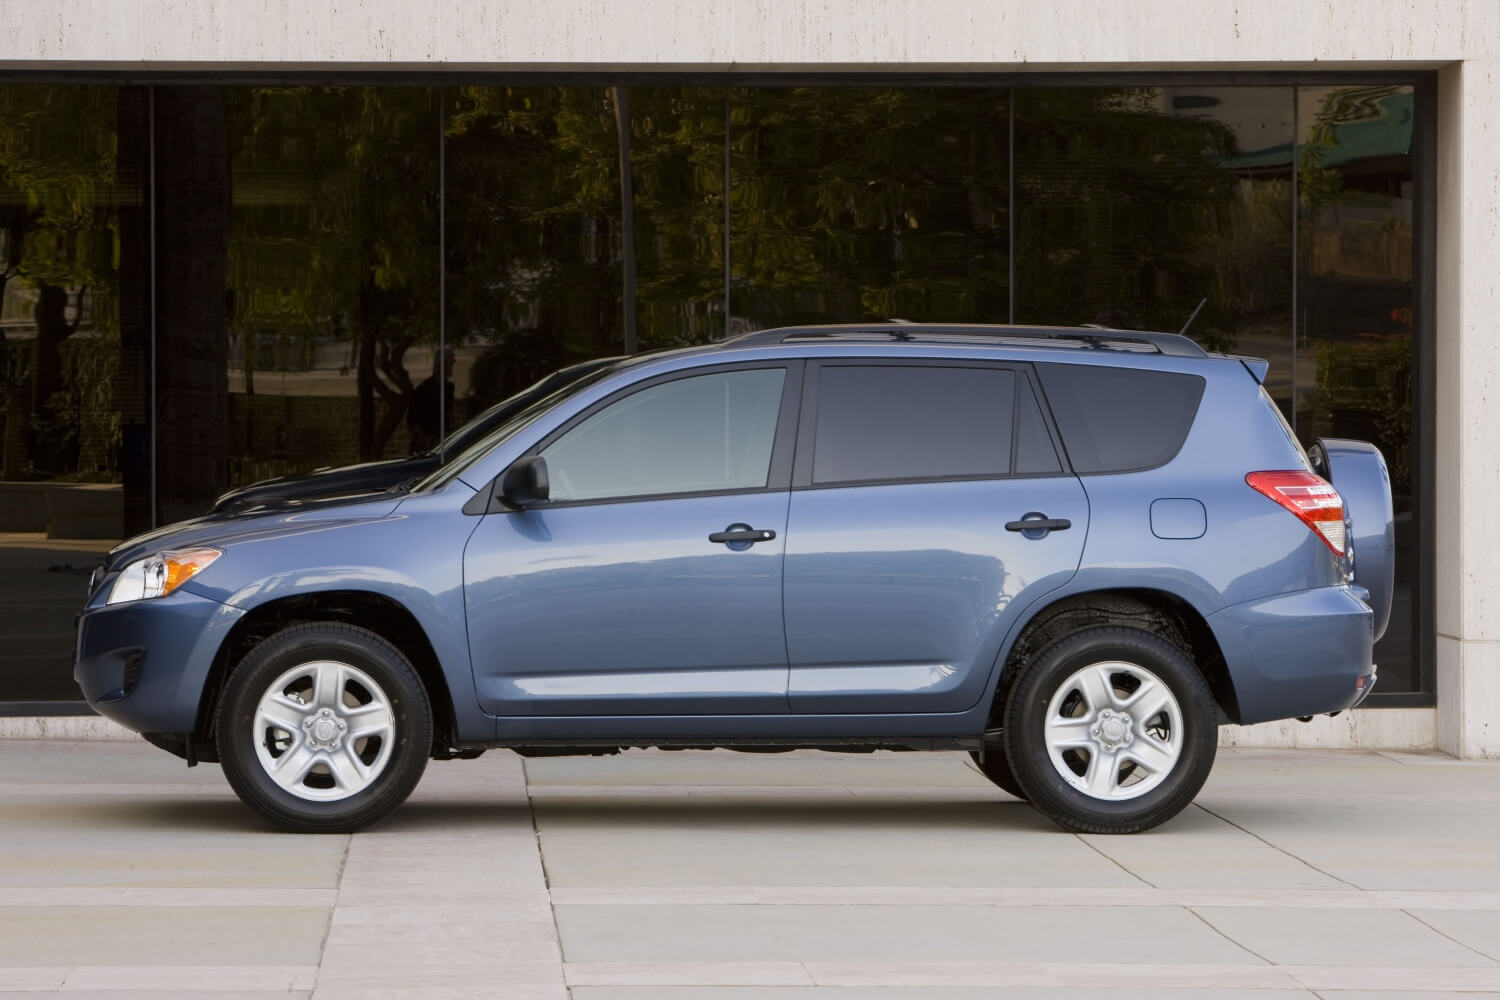 These reliable compact SUVs from 2009 include this Toyota RAV4 in blue